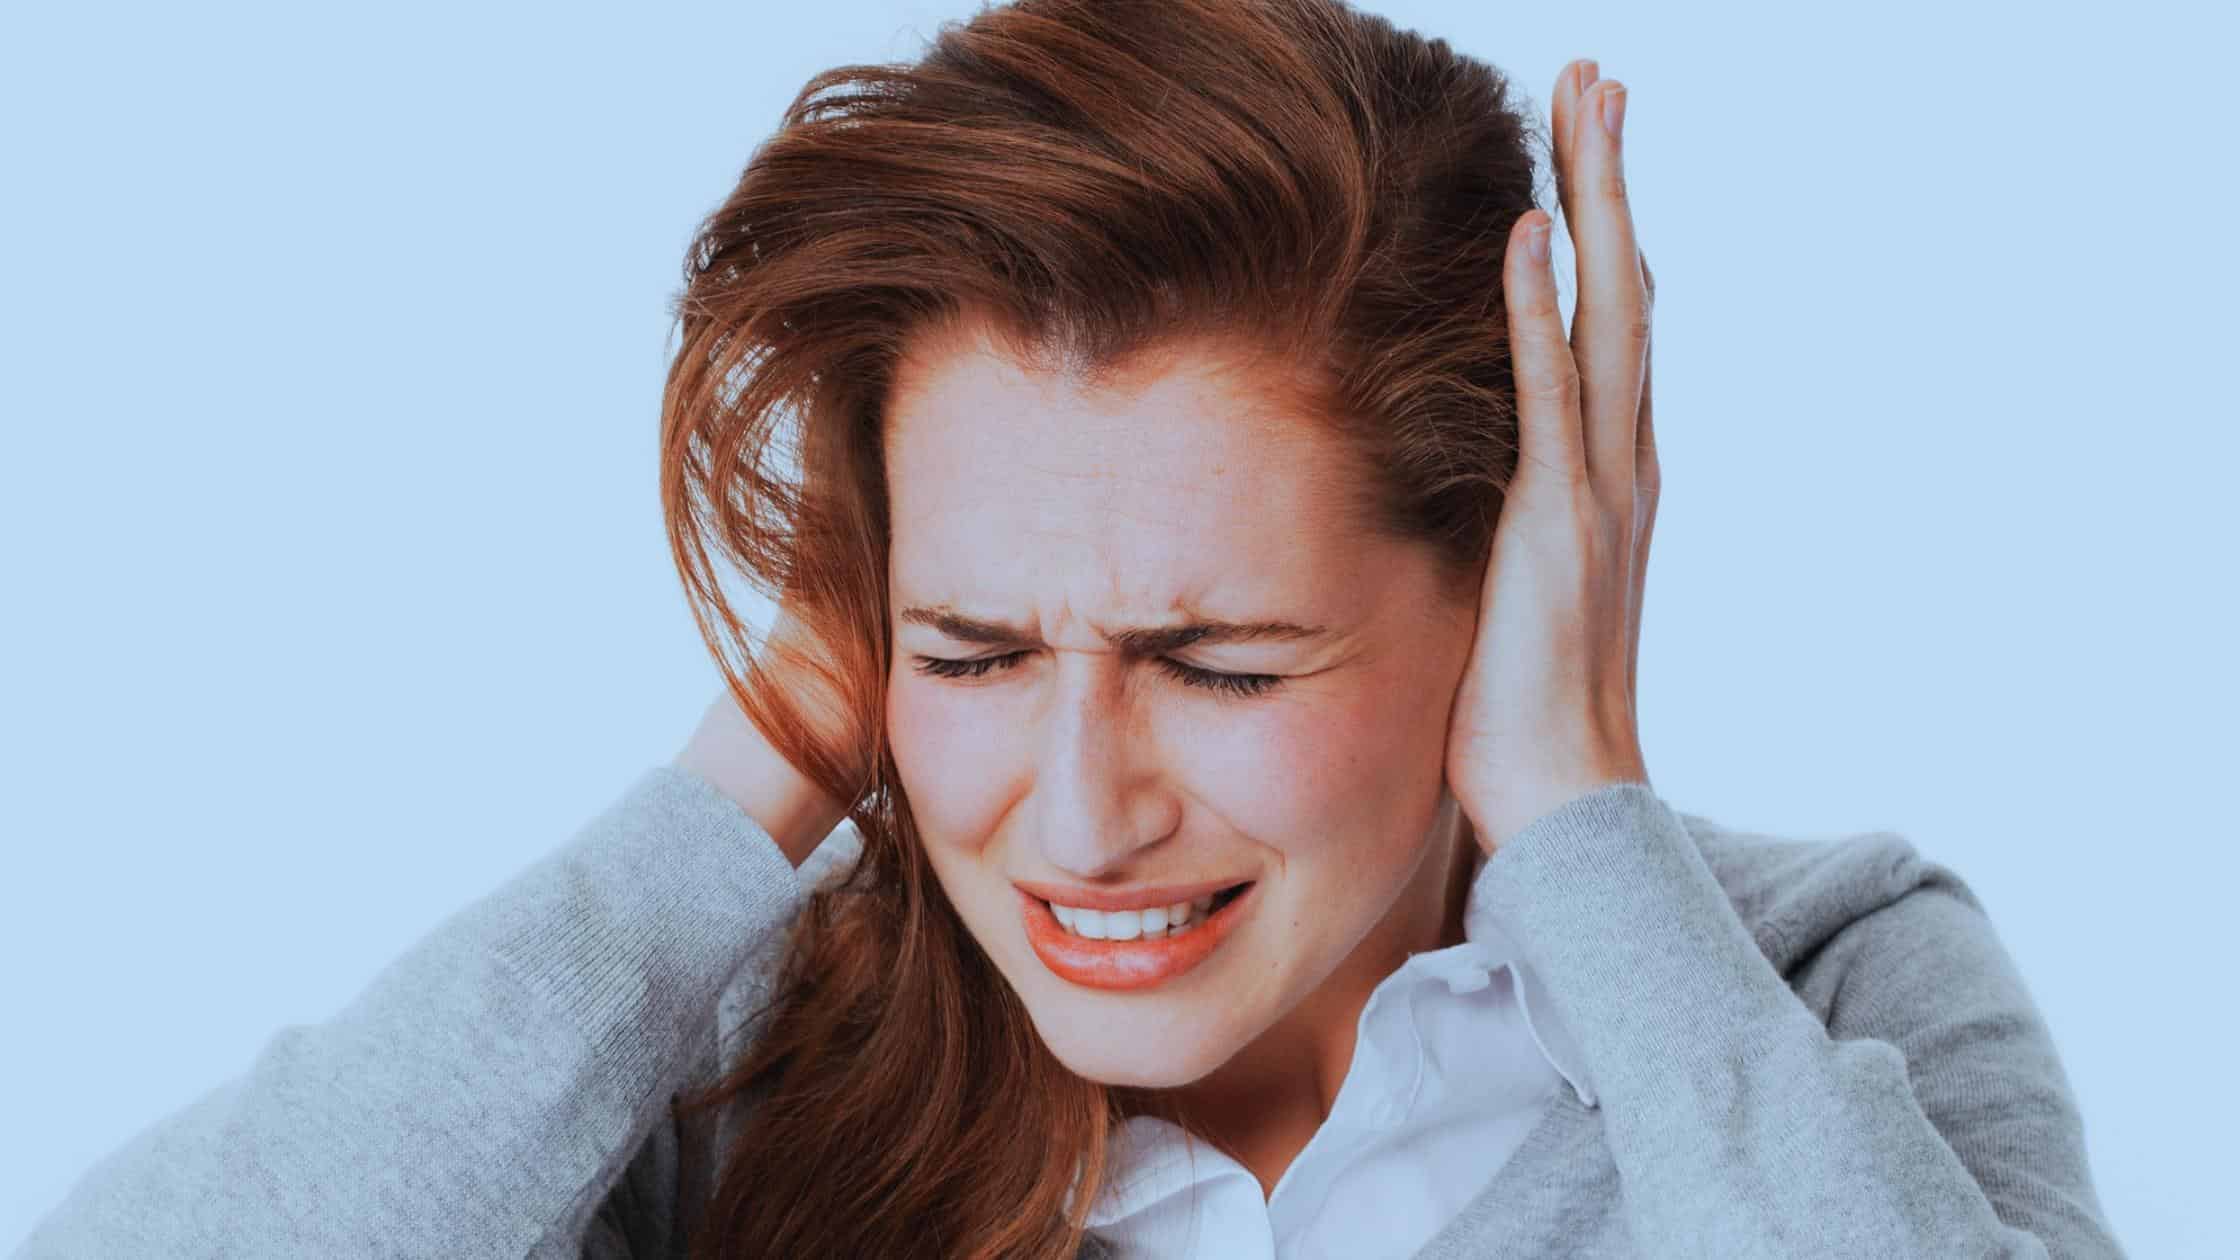 A Possible Link between Tinnitus & Painkiller Use